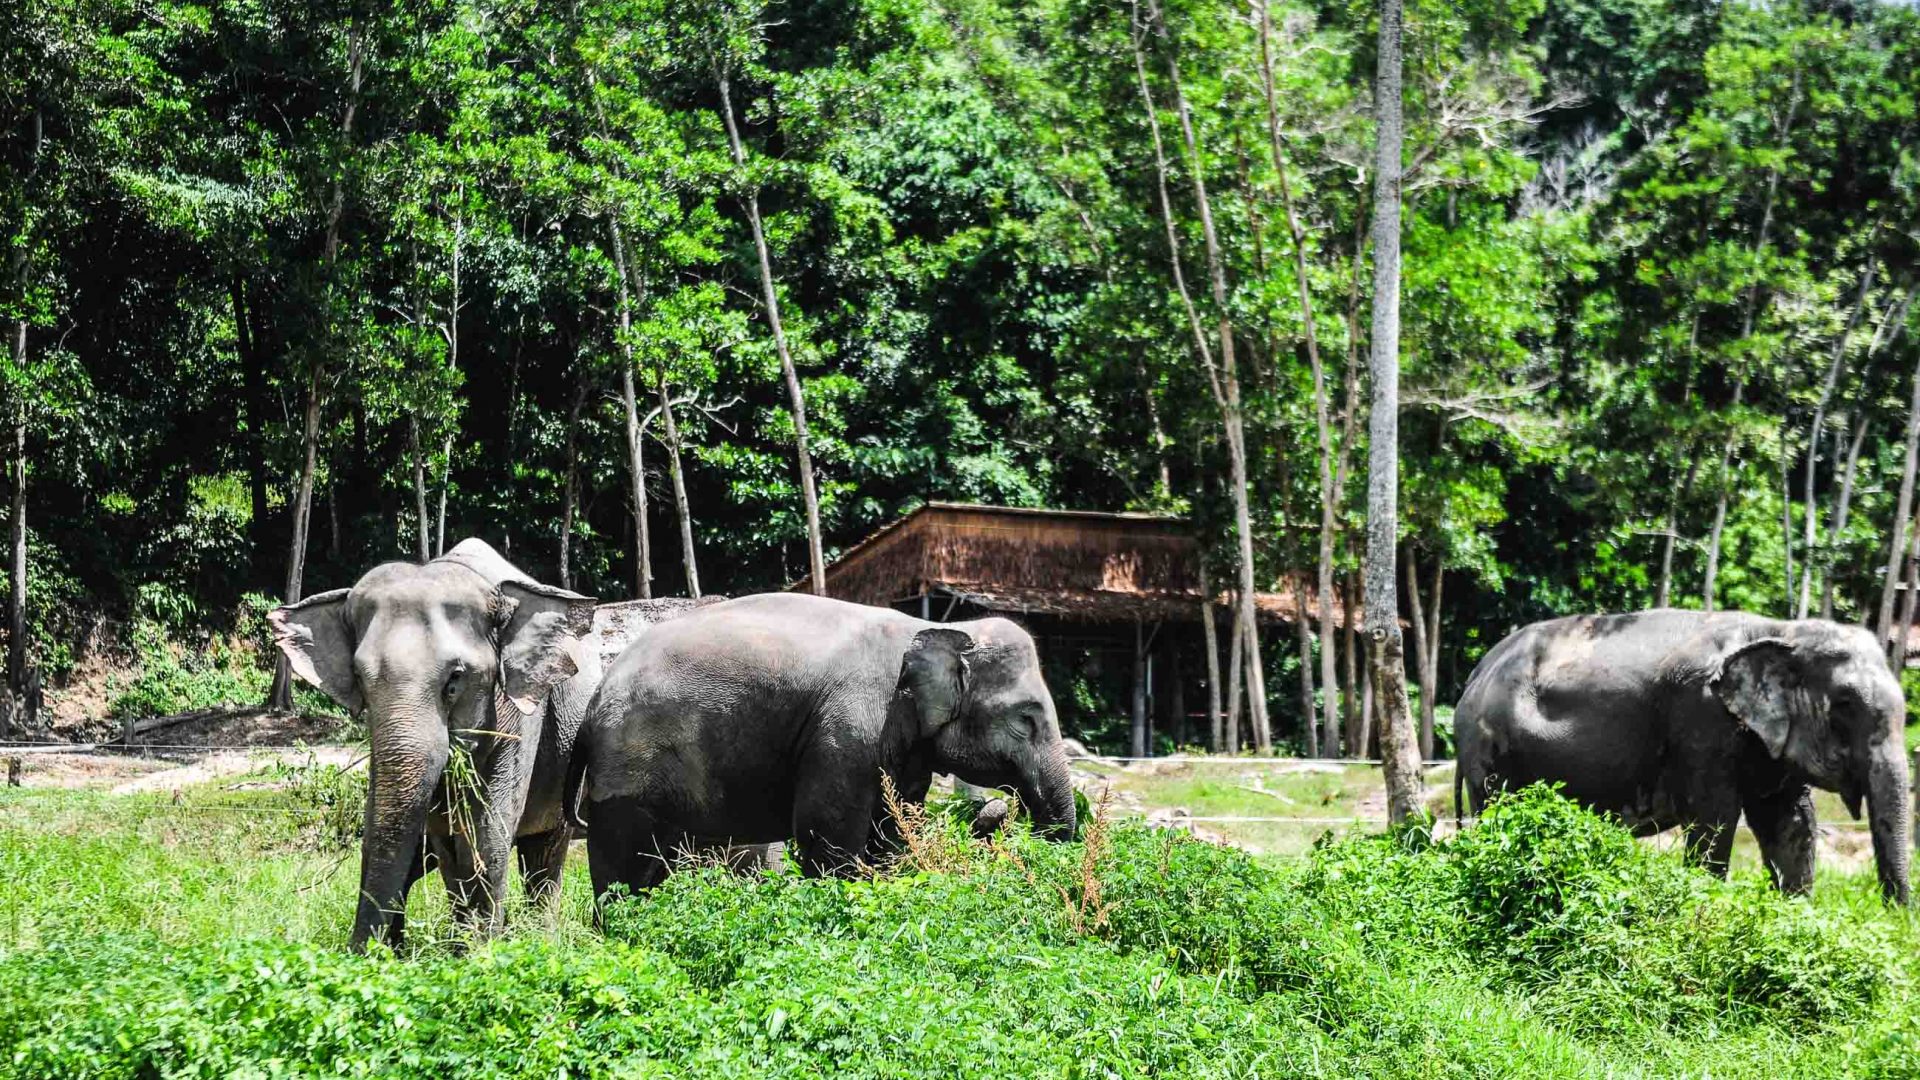 Elephants at the reserve.